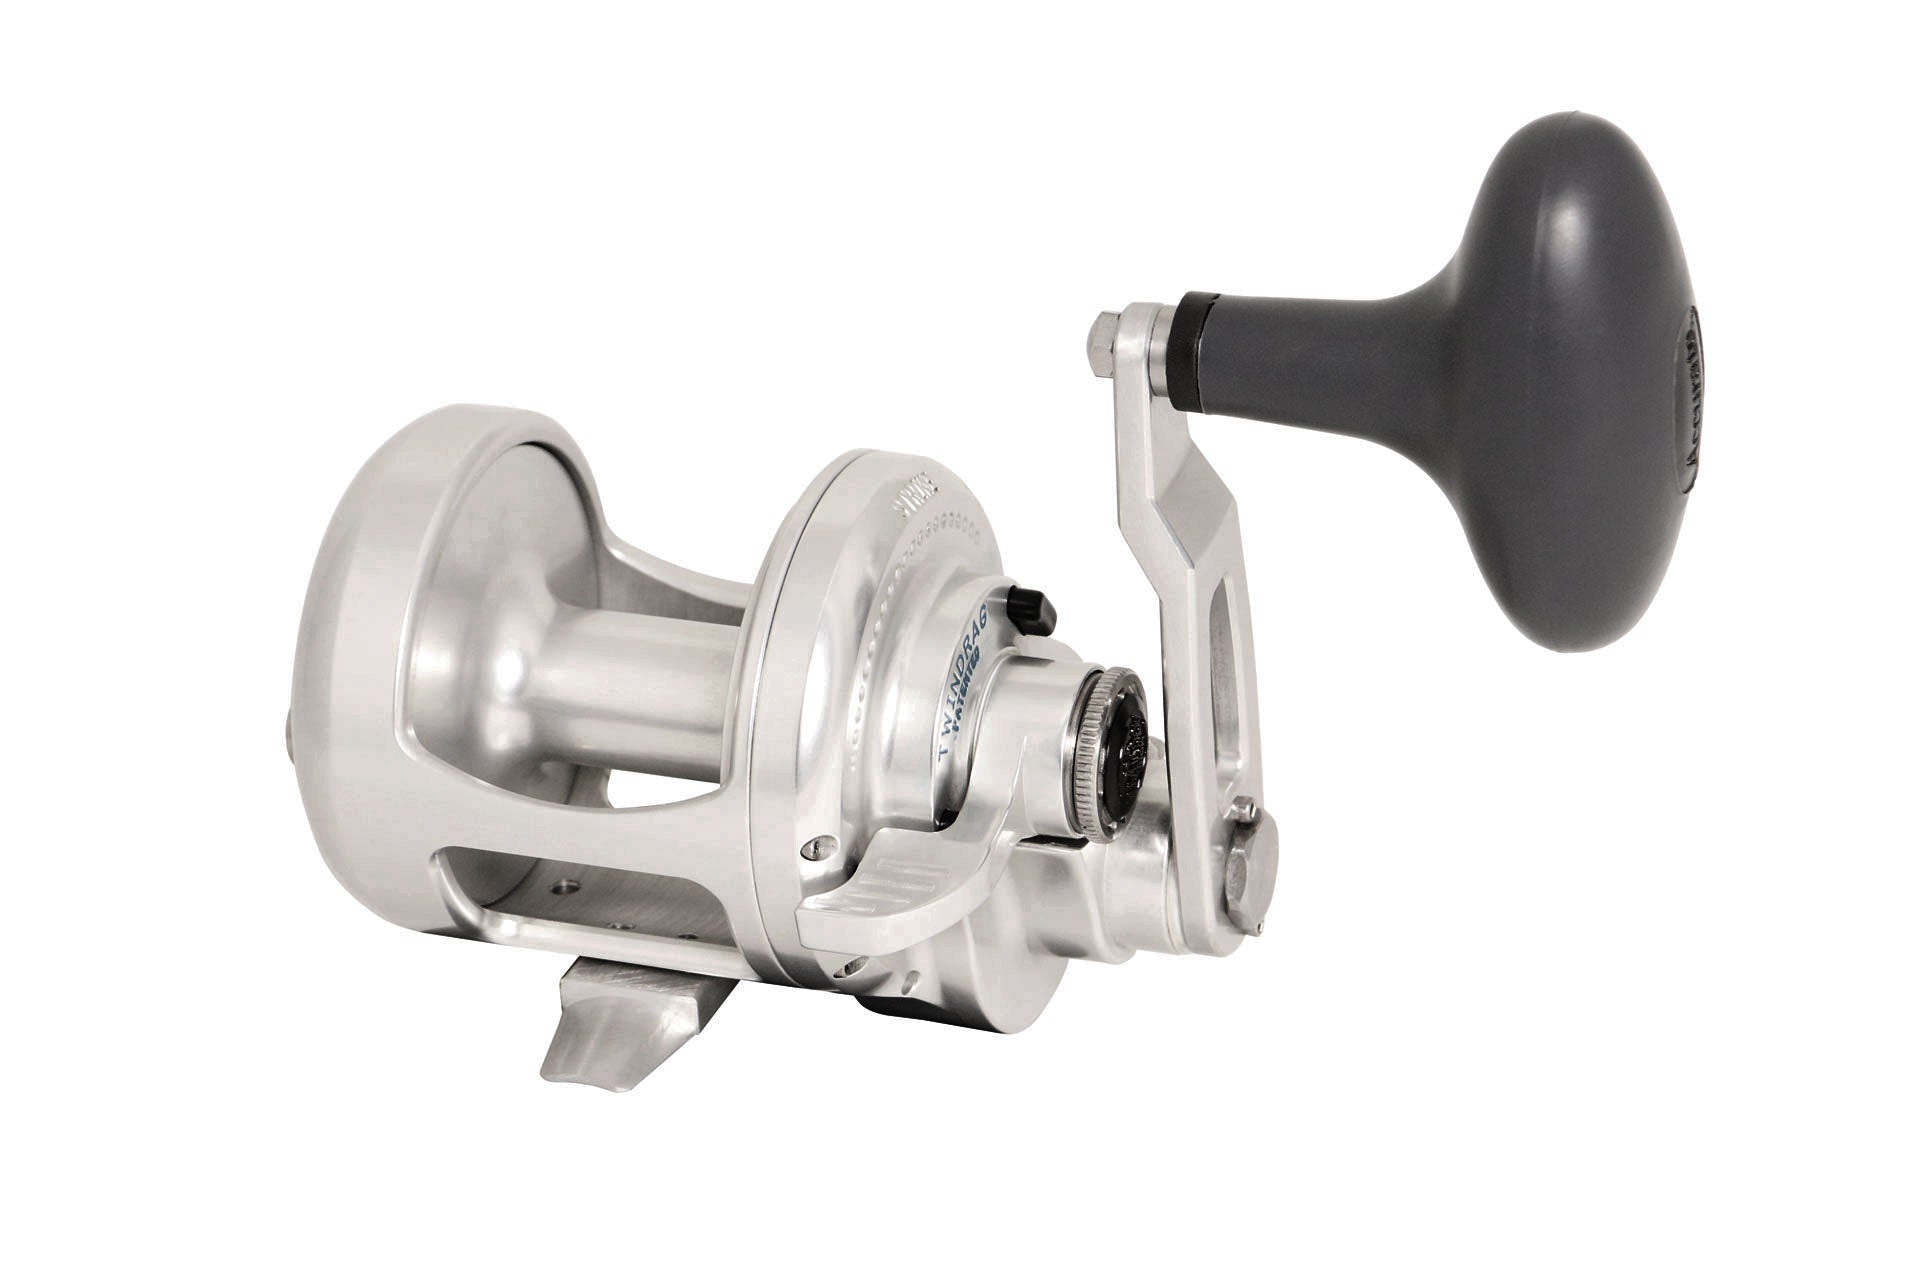 Surprise gifts Accurate ATD Platinum Twin Drag Reels from